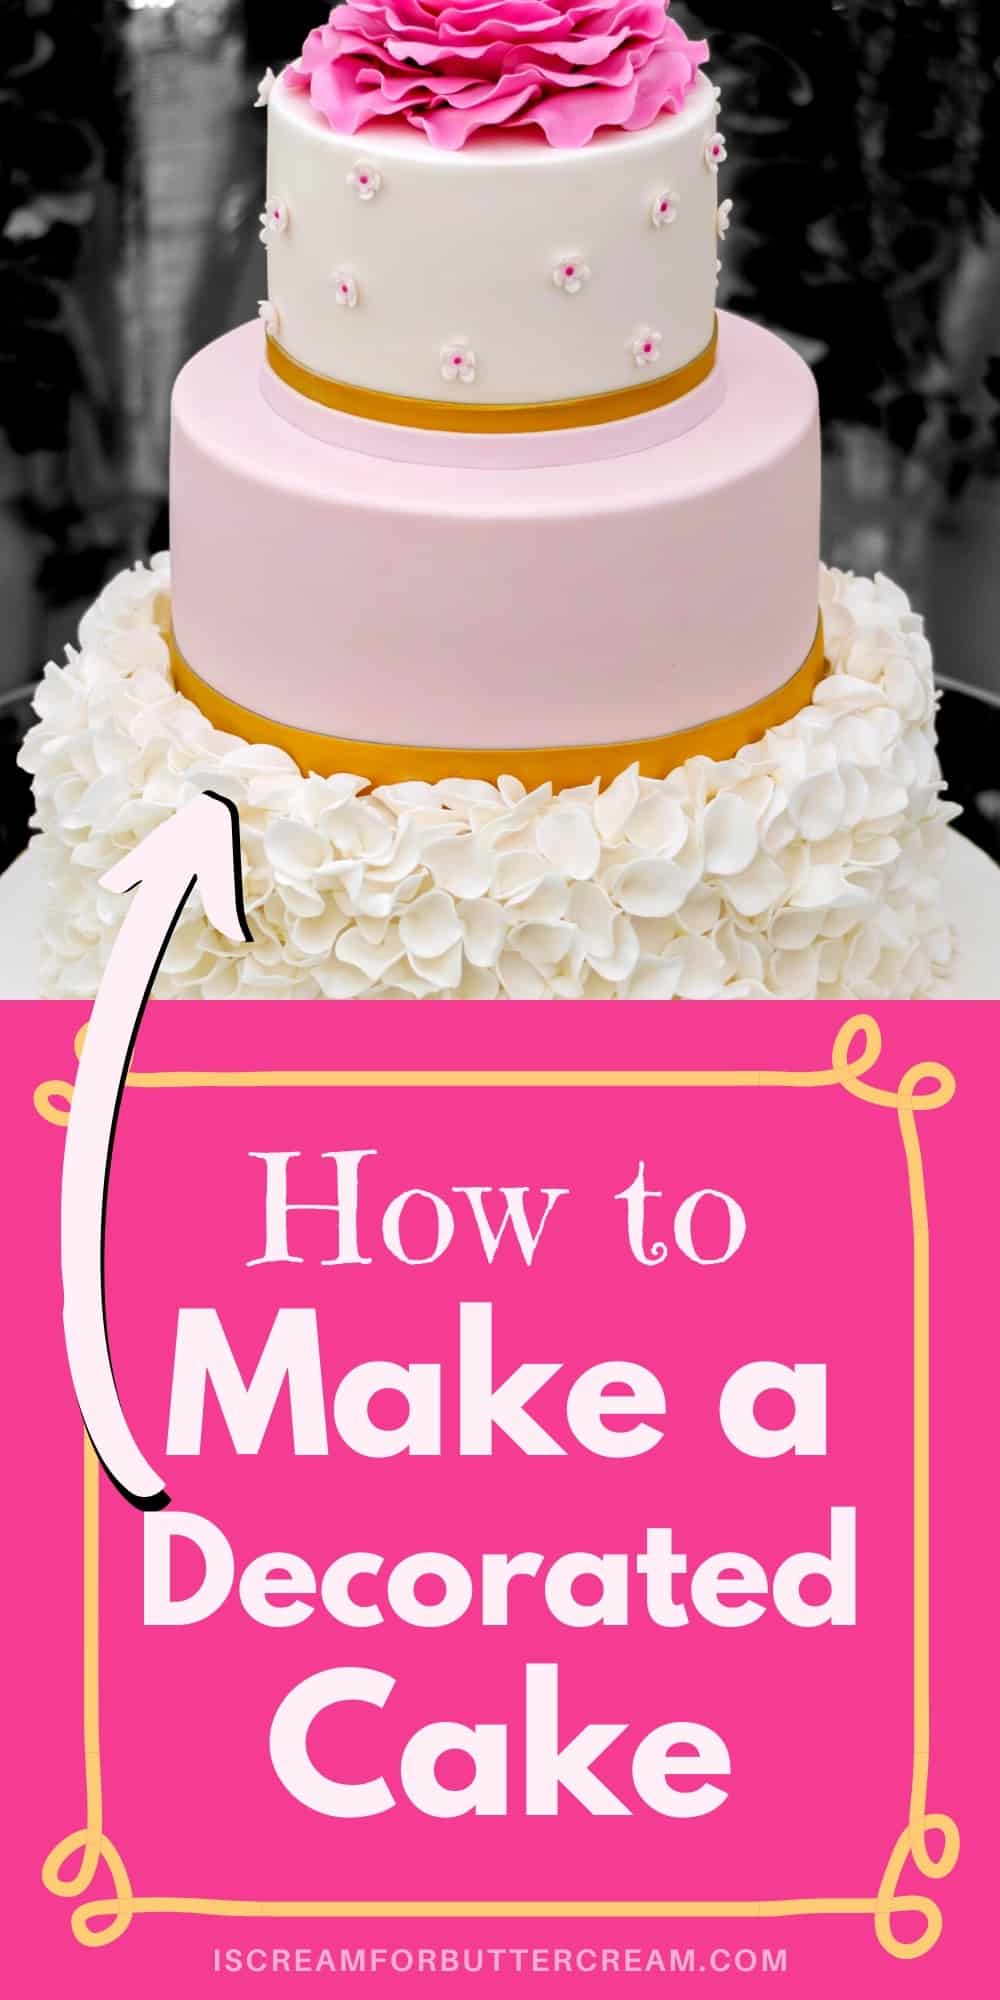 Anatomy of a Decorated Cake (for beginners)